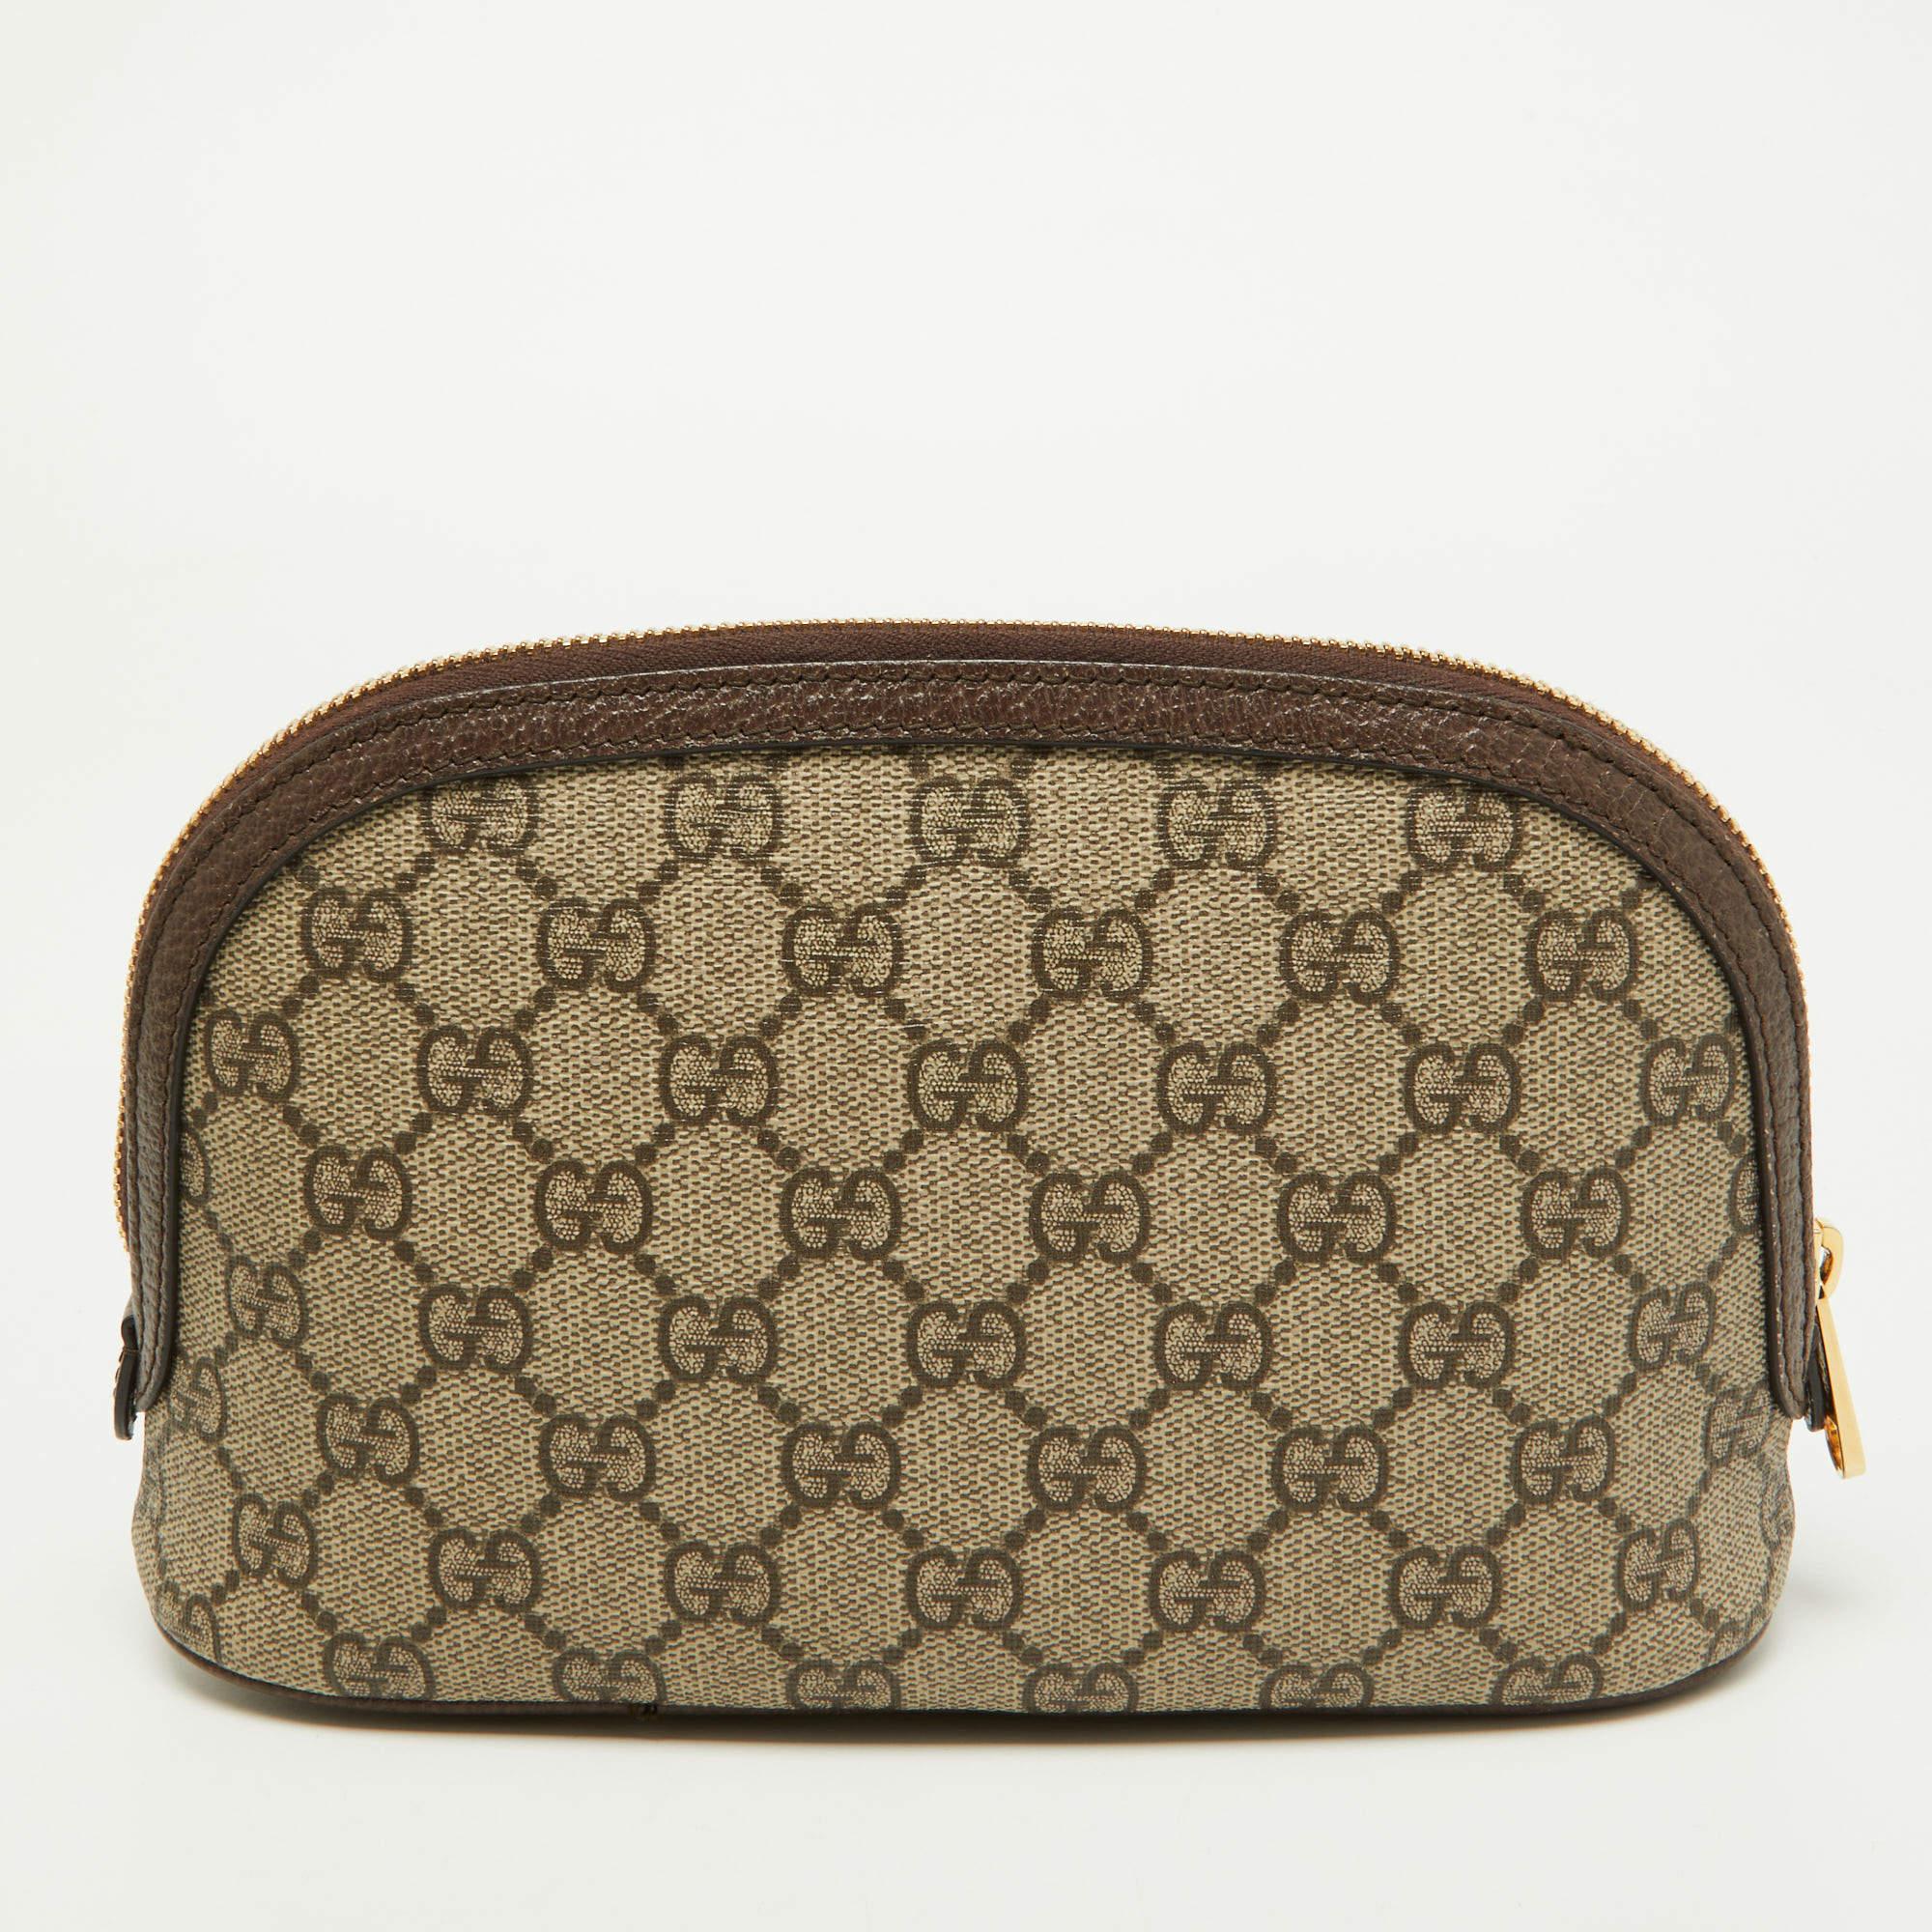 Gucci Beige GG Supreme Canvas and Leather Pouch 5